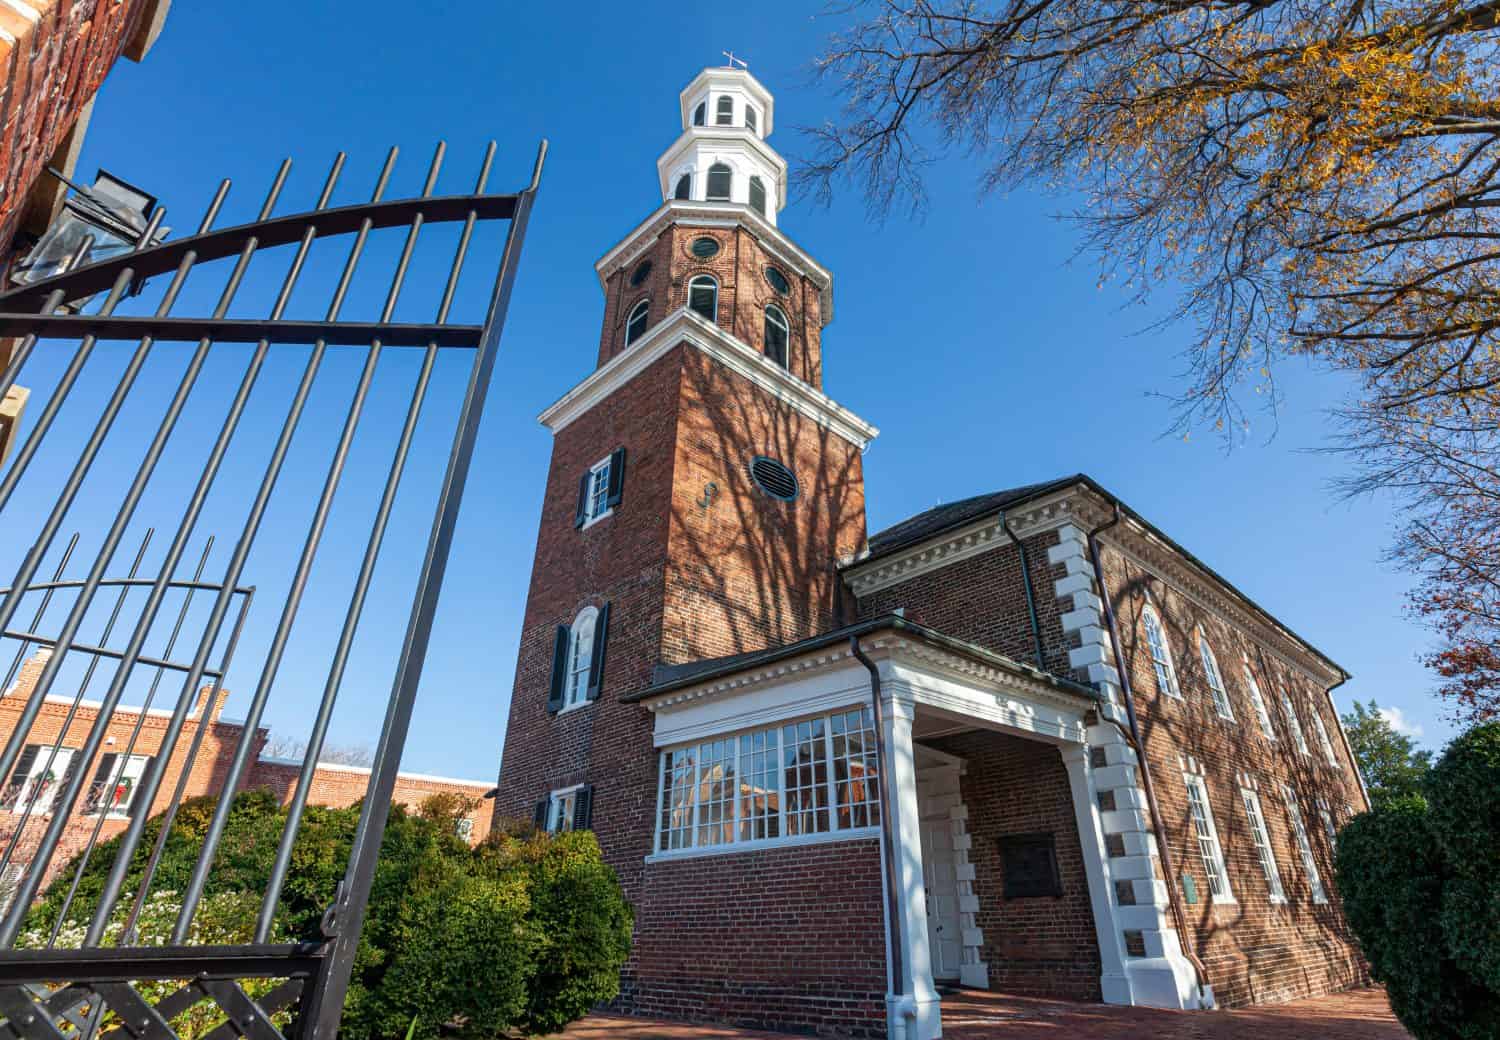 Close up image of the  entrance of historic Christ Church. This brick building with a tower was built in 1773 as the main Church of England in the neighborhood. There is a tall metal gate in the front